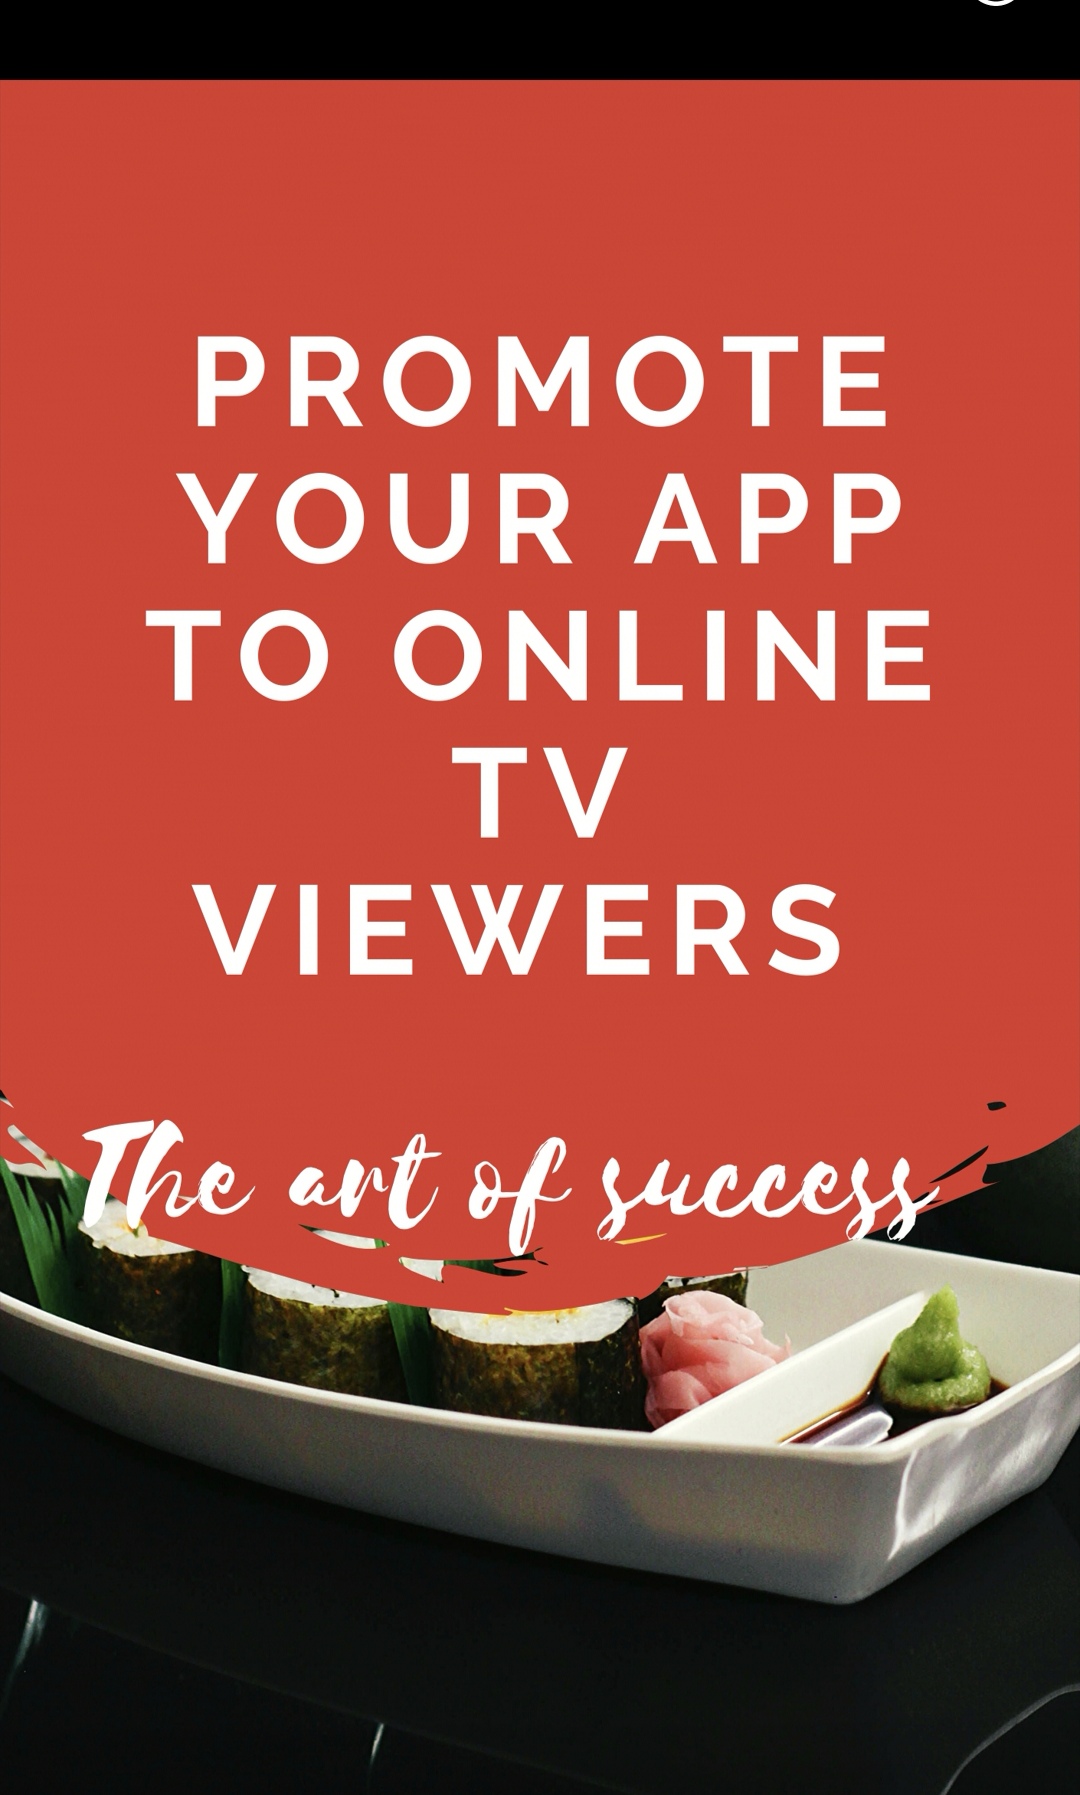 Promote Mobile App on online TV channel 100,000 viewers.